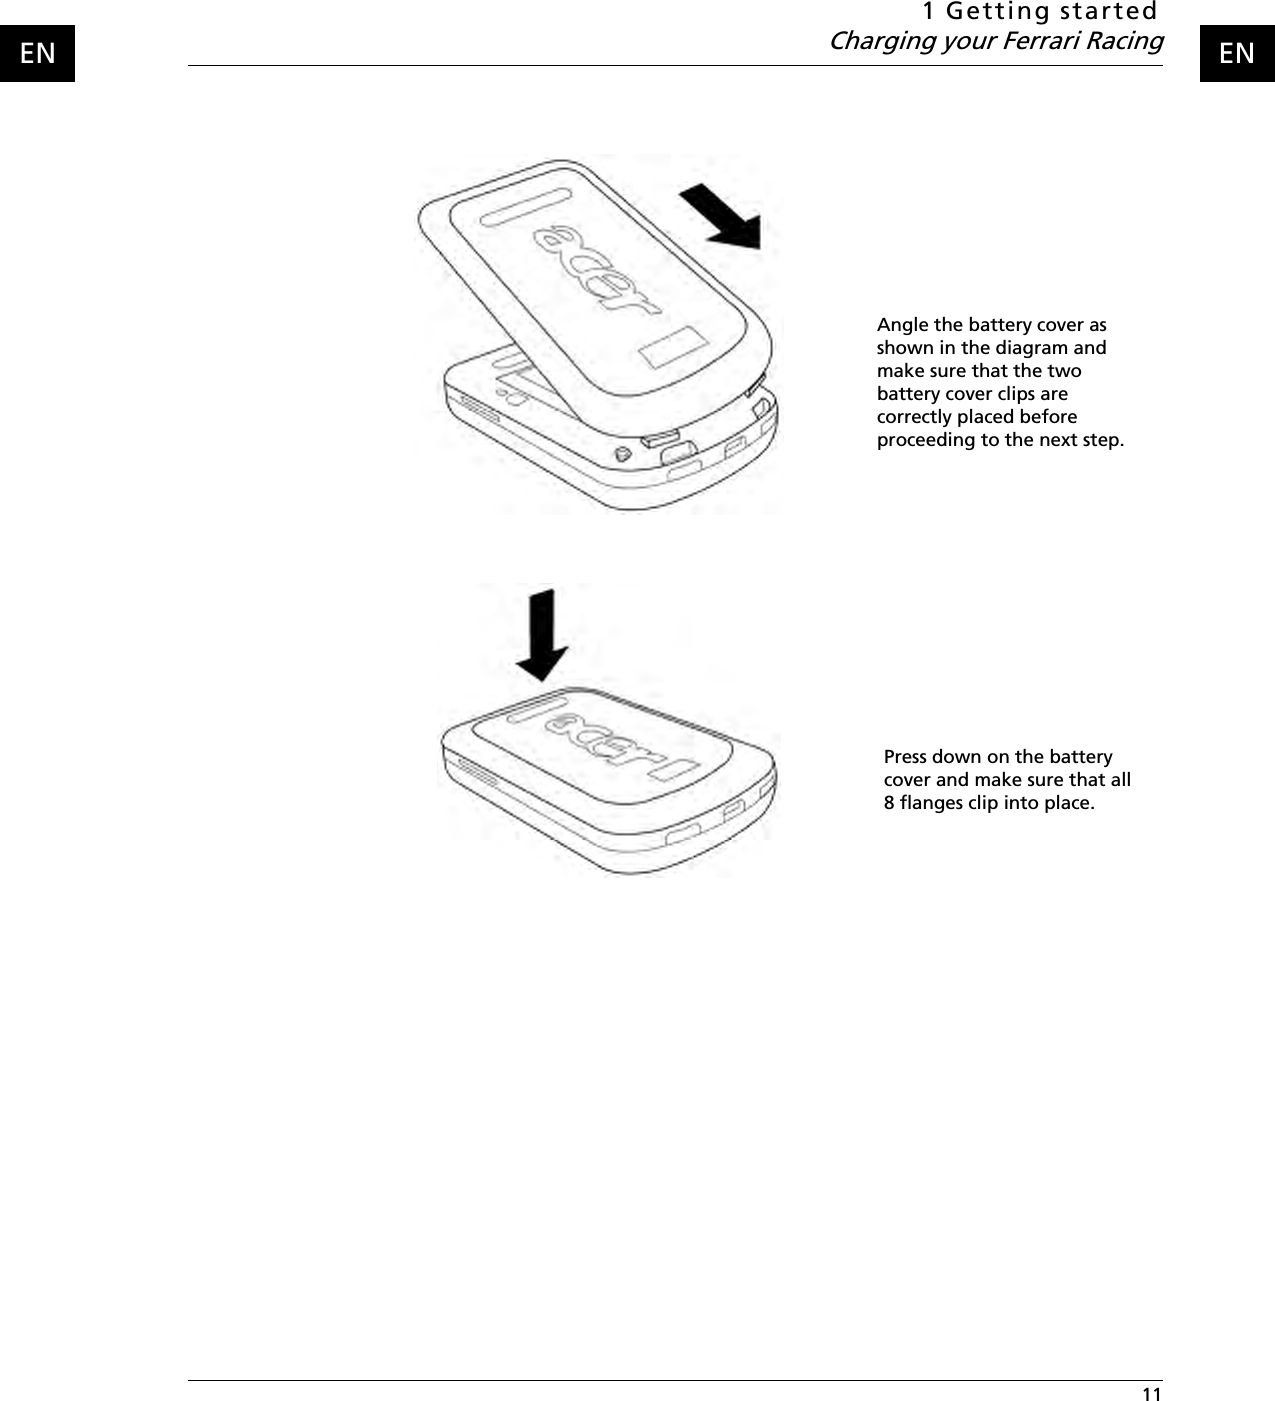 1 Getting startedCharging your Ferrari Racing 11ENENAngle the battery cover as shown in the diagram and make sure that the two battery cover clips are correctly placed before proceeding to the next step.Press down on the battery cover and make sure that all 8 flanges clip into place.